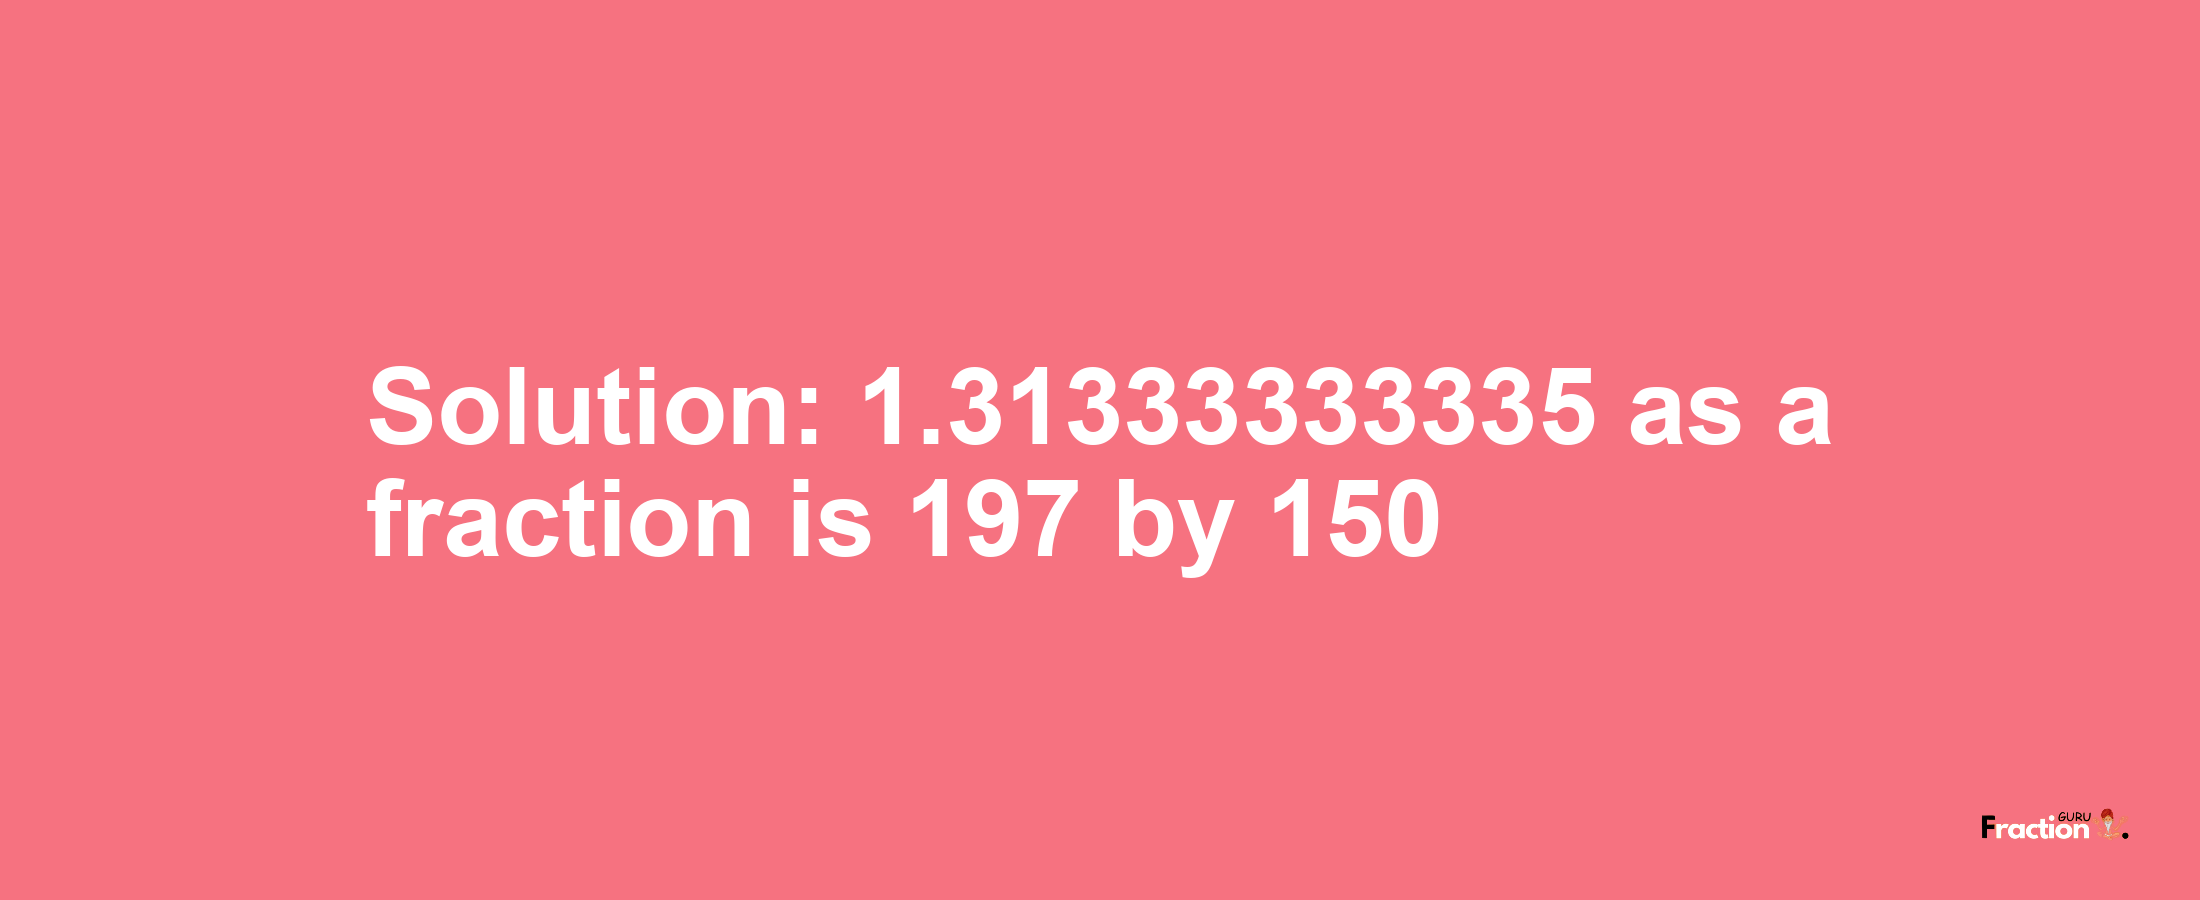 Solution:1.31333333335 as a fraction is 197/150